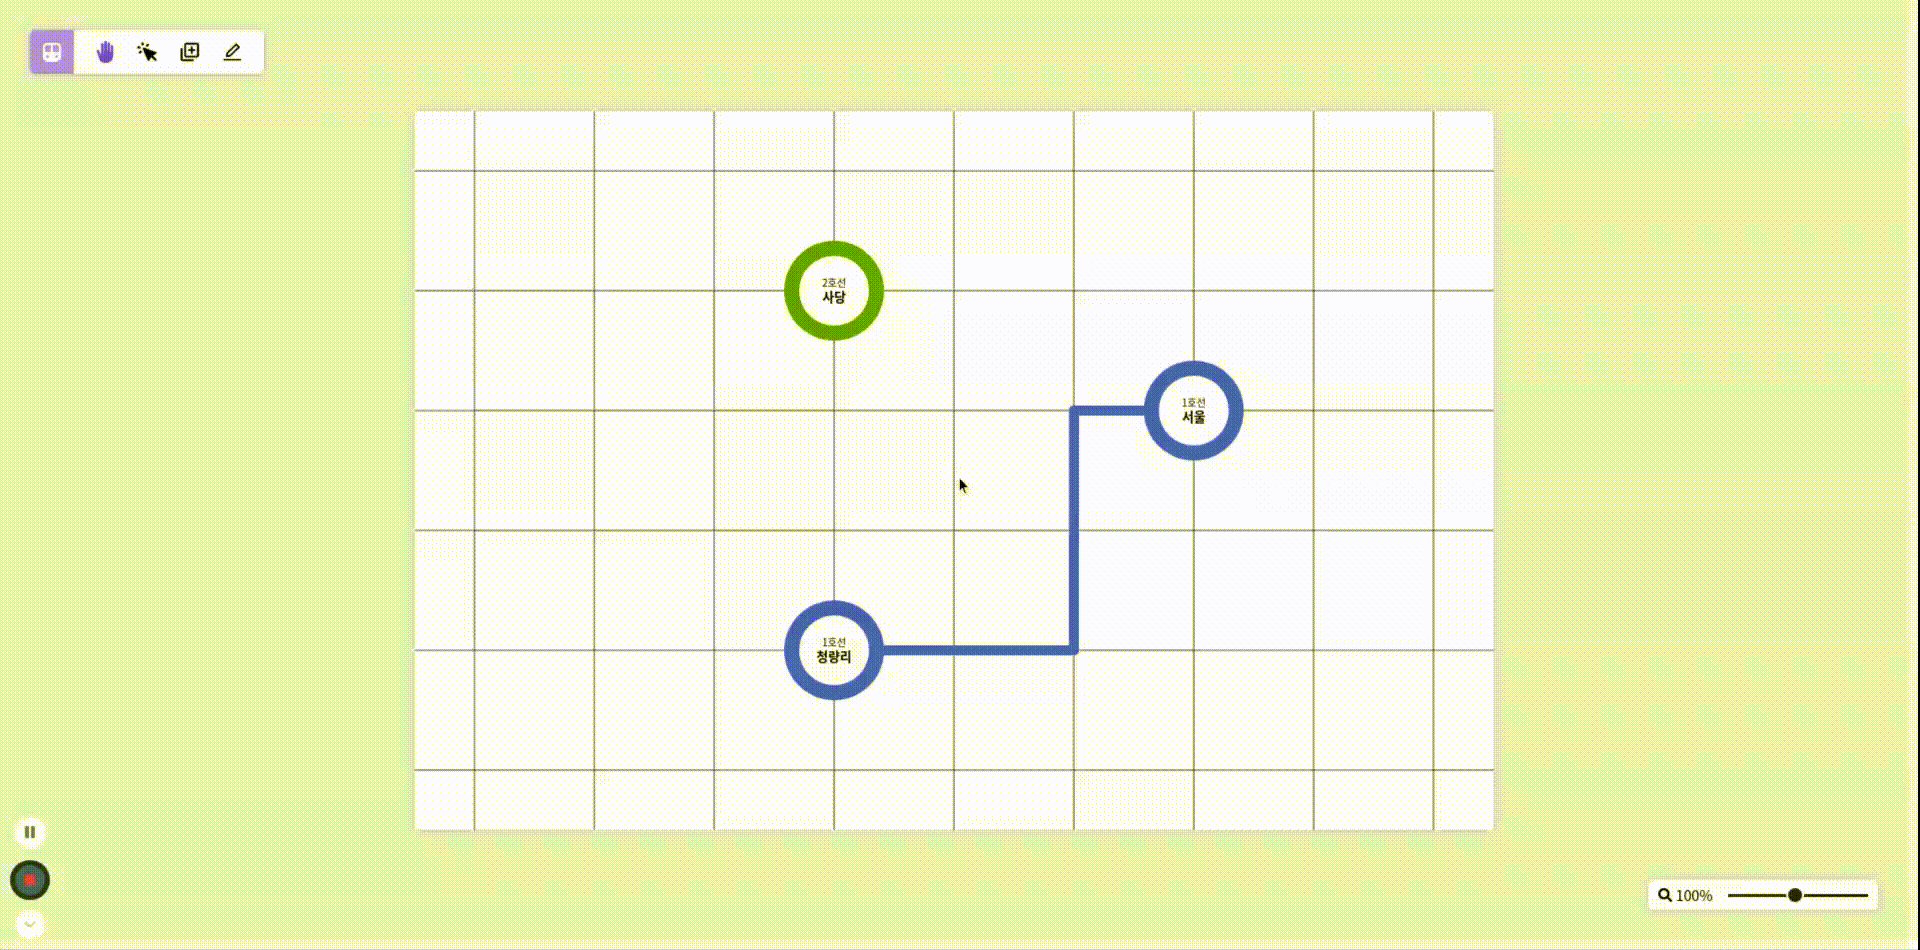 train-map-visualizer-side-project-midterm-review-9.gif